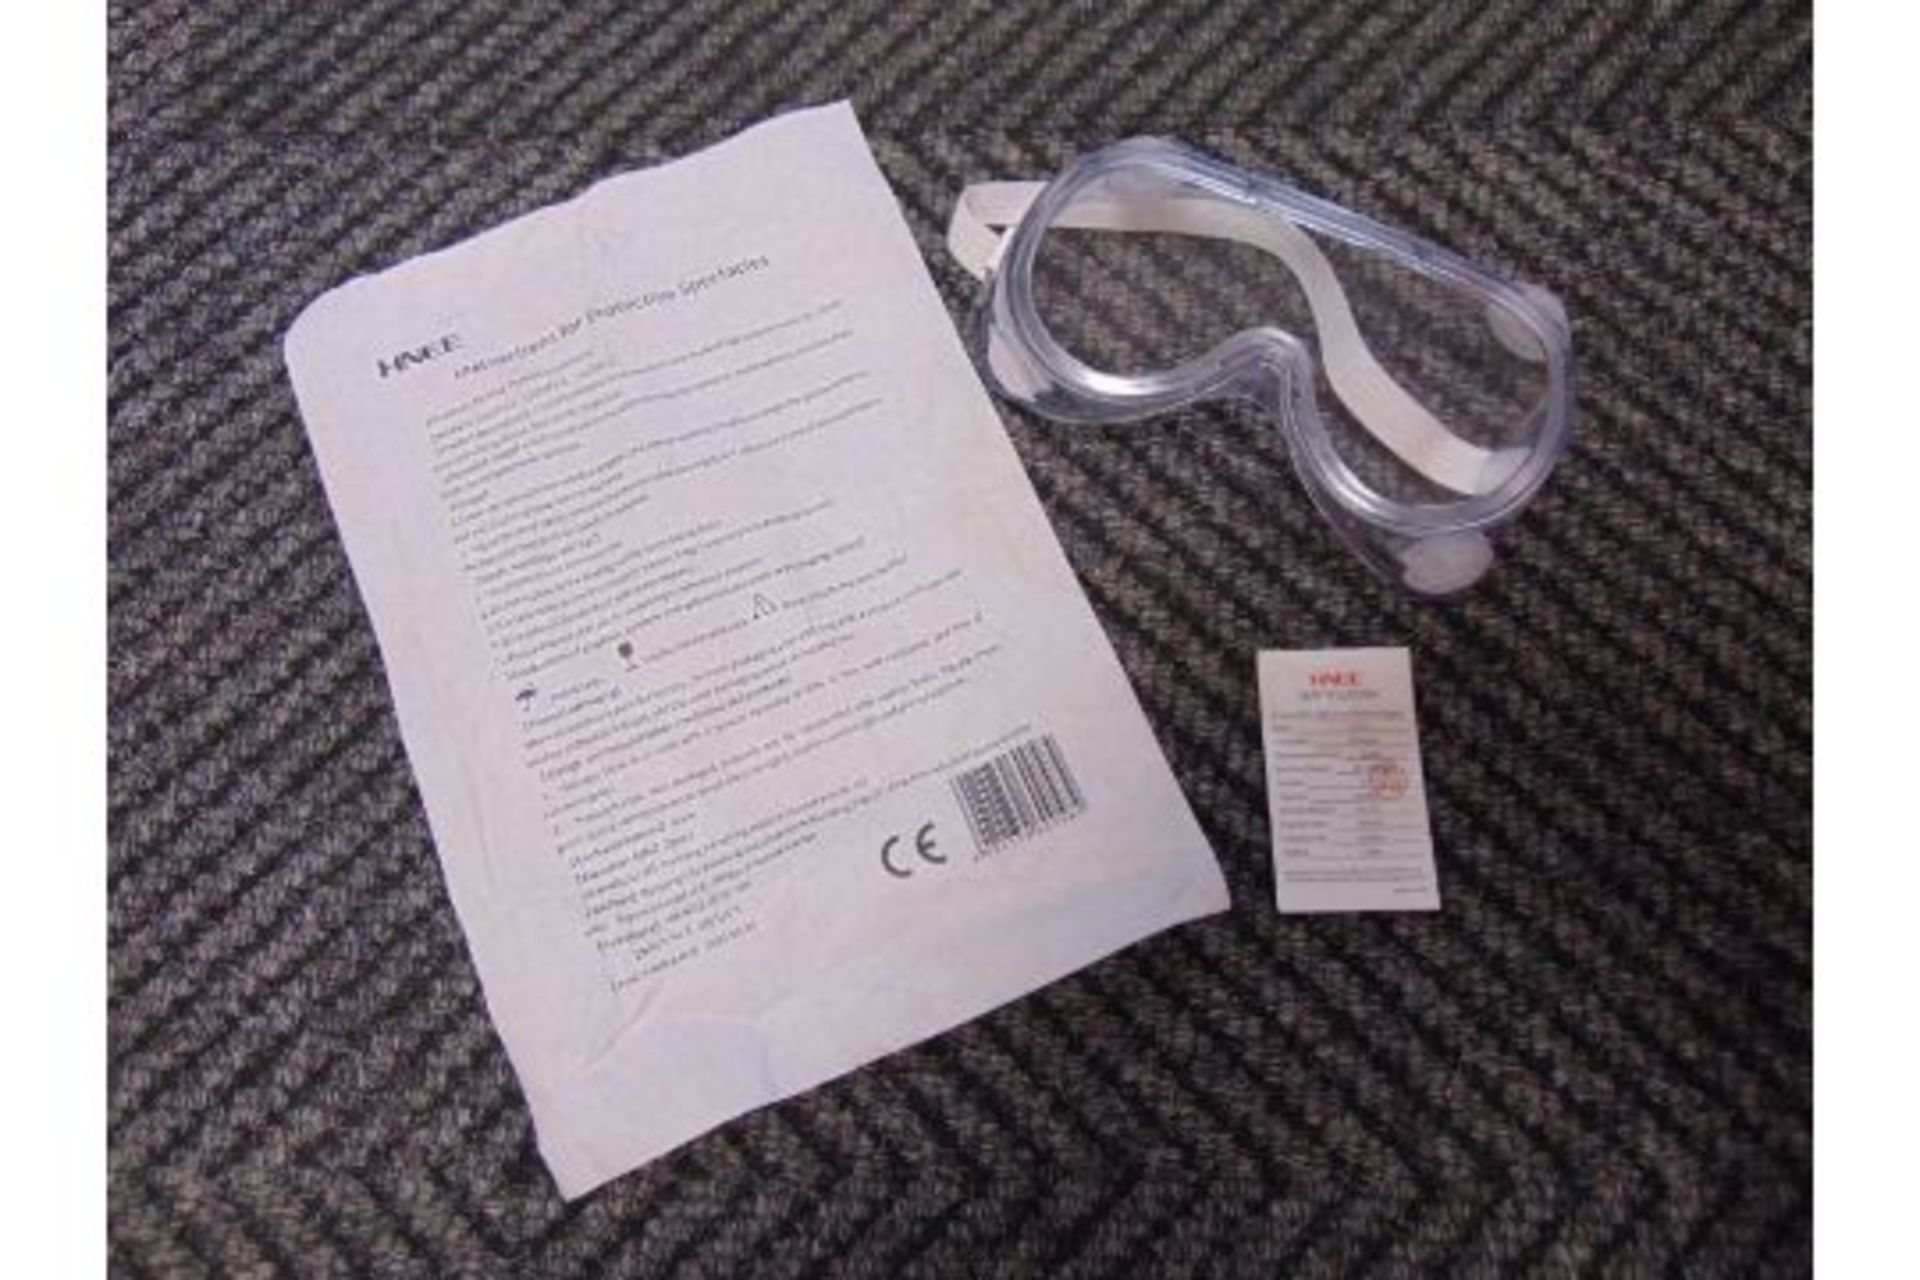 80 x NEW UNISSUED Safety goggles GLYZ1-1 - Image 5 of 15